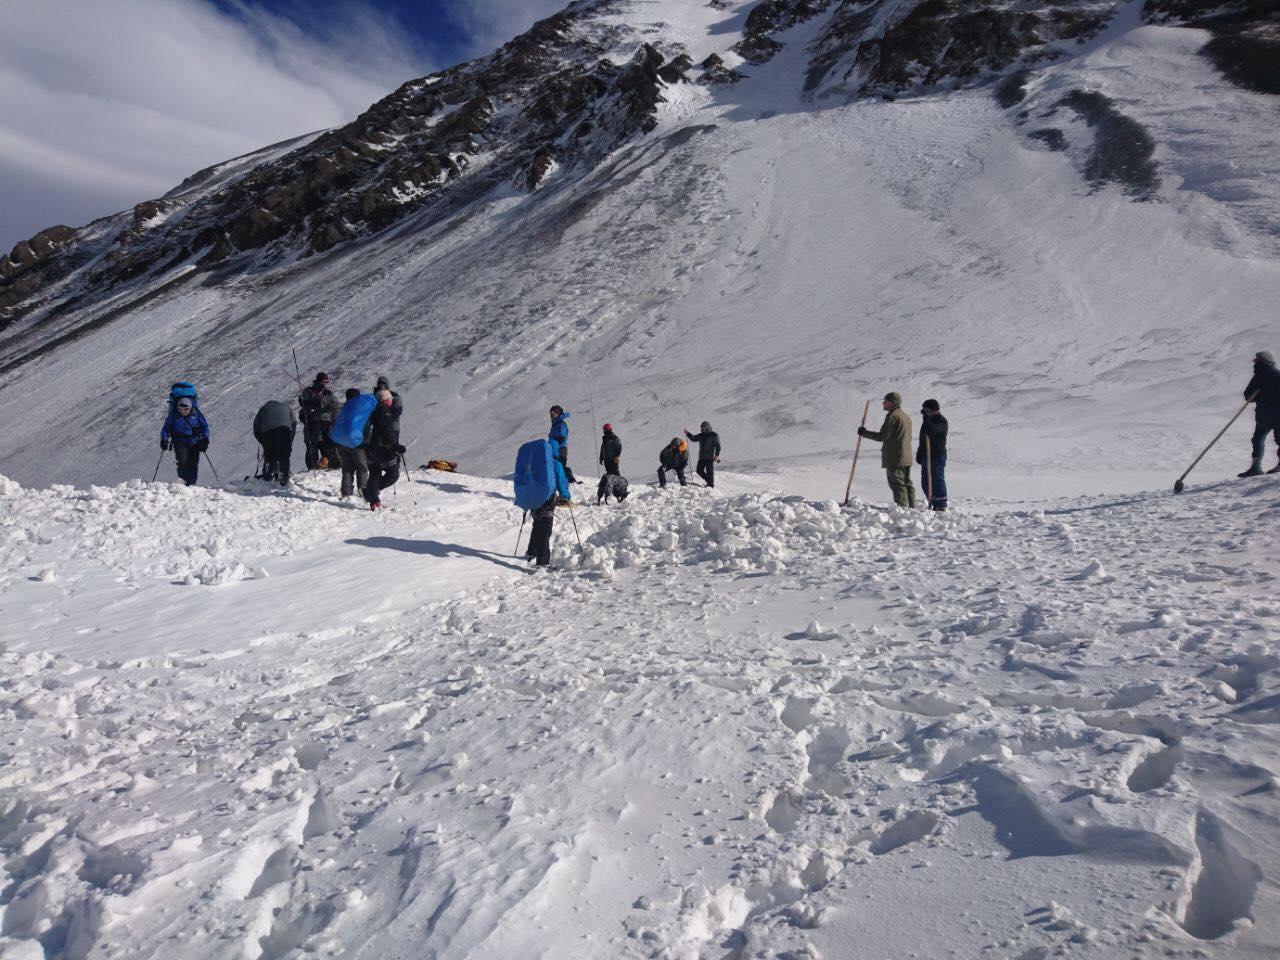 How to safeguard from avalanche? Tips for mountaineers [PHOTO]